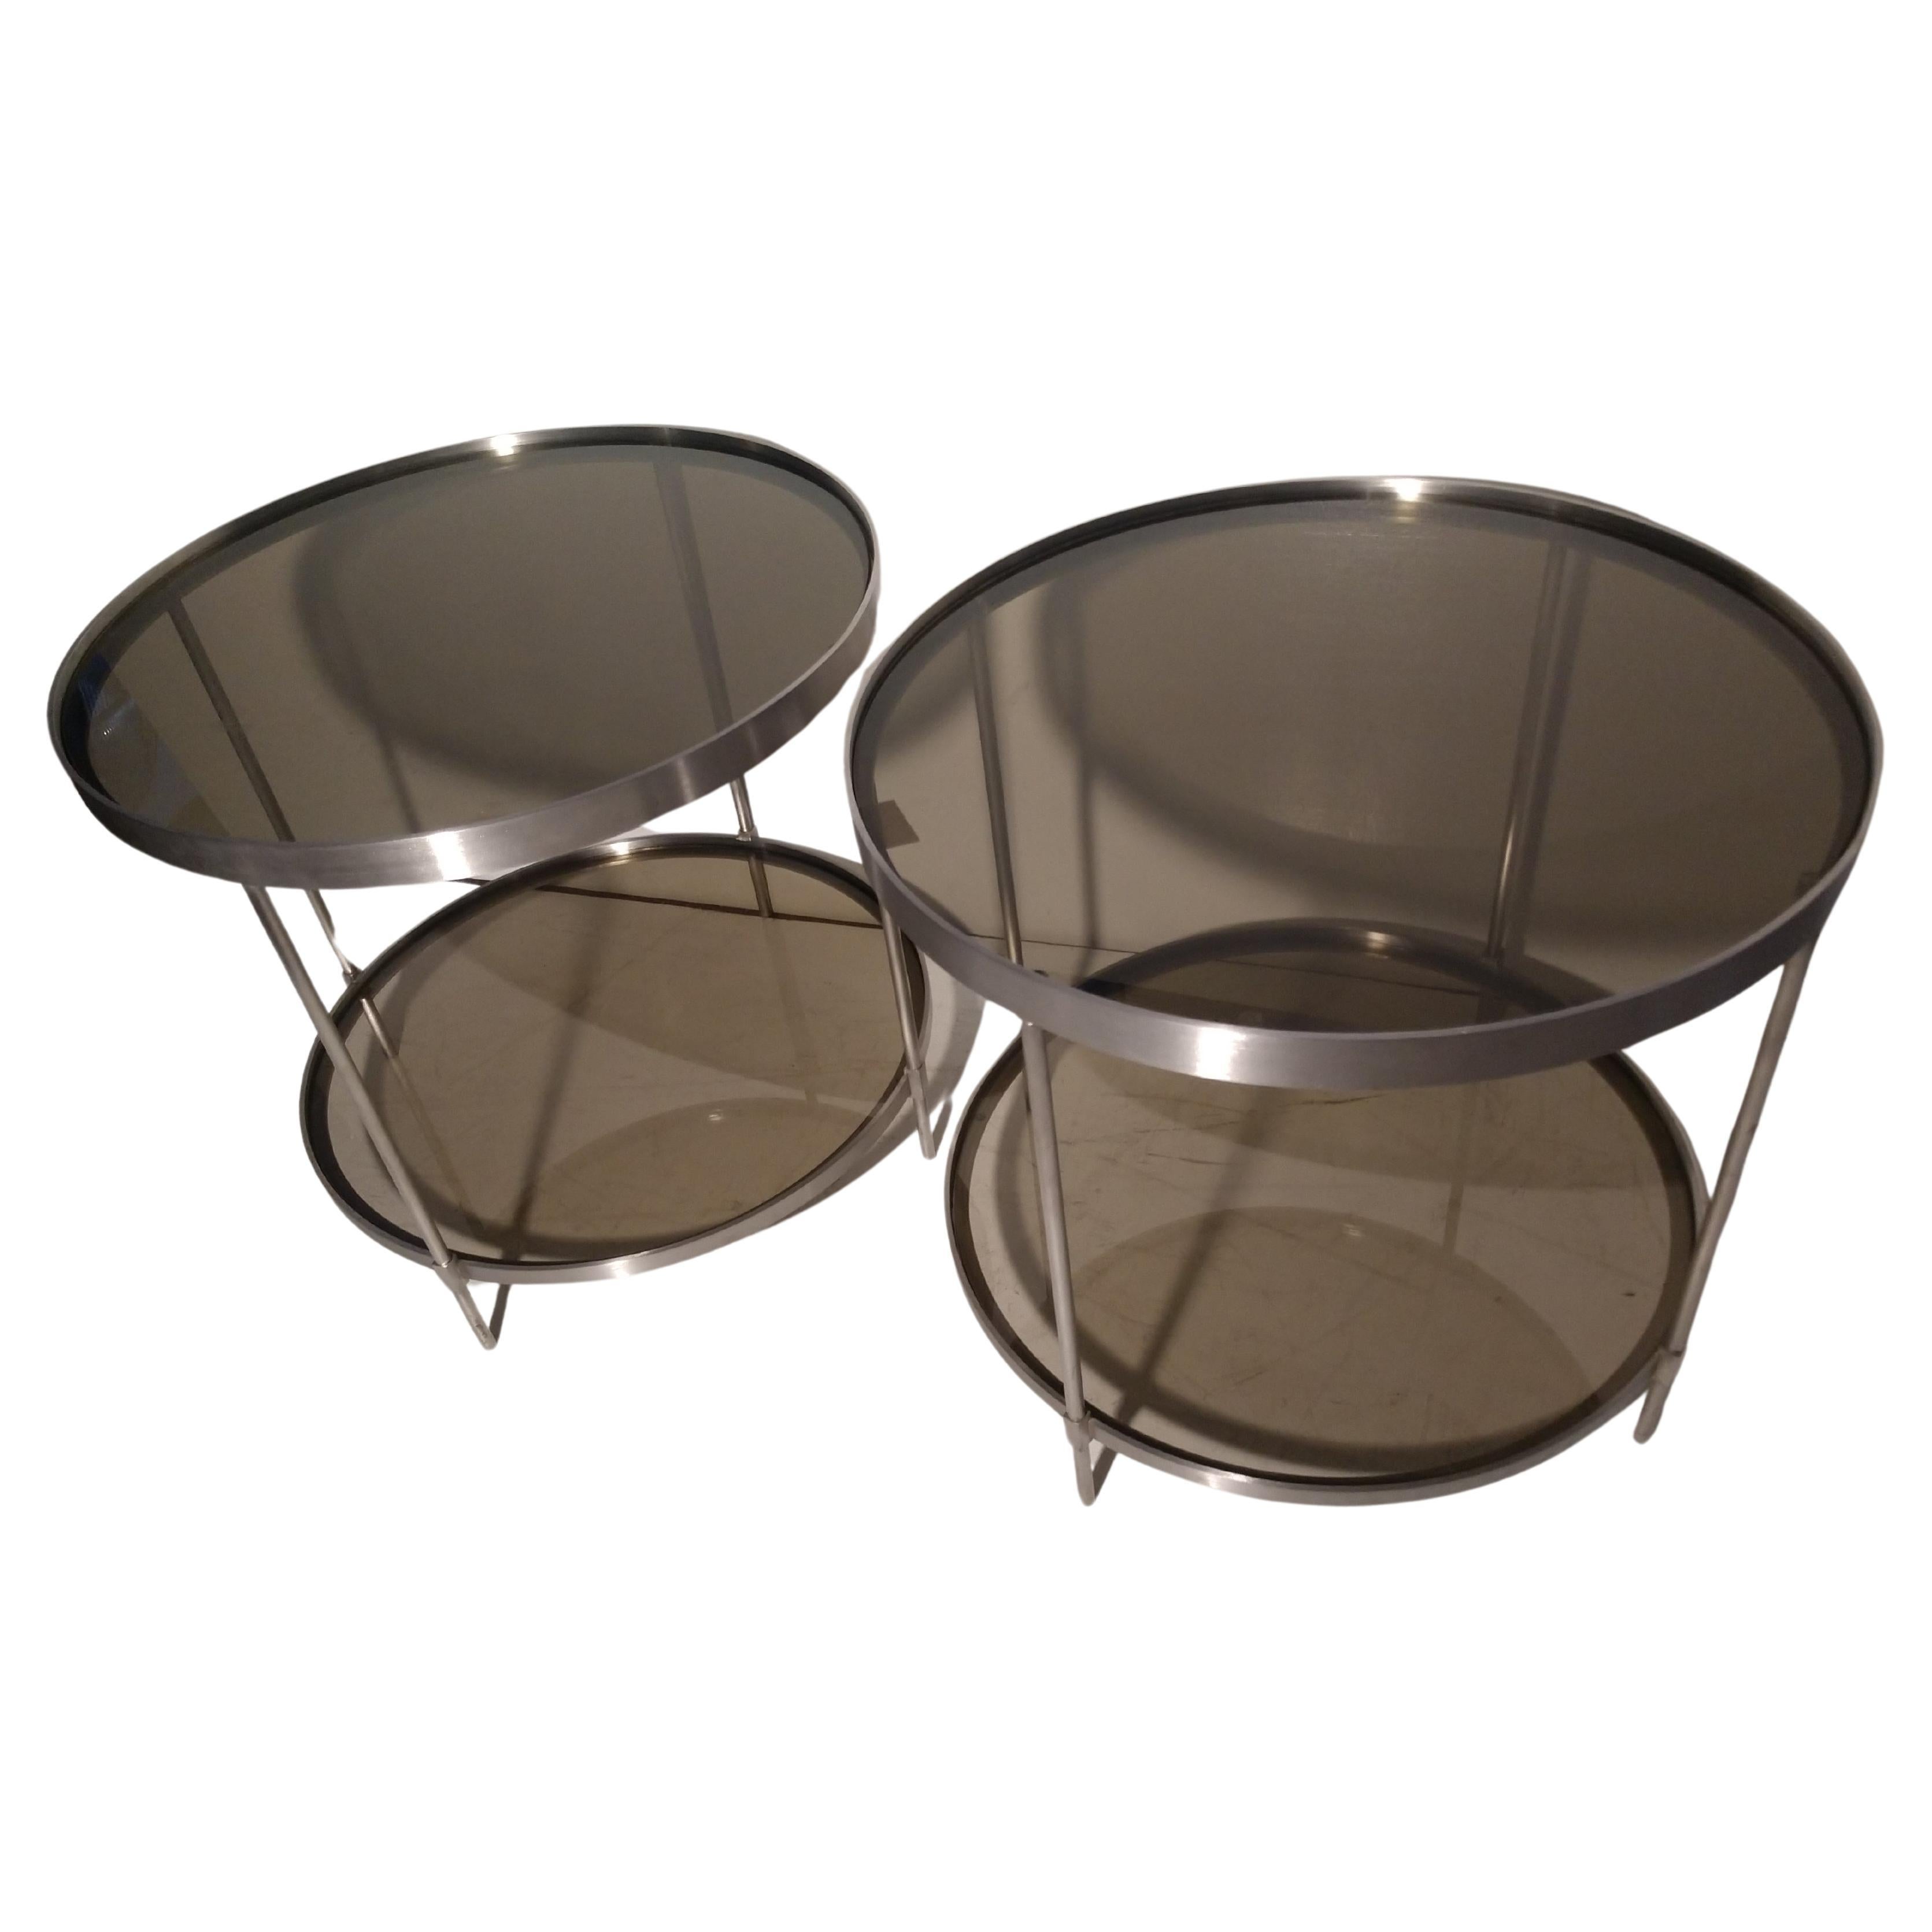 American Pair of Mid Century Modern Stainless Steel Round End Tables with Smoked Glass For Sale